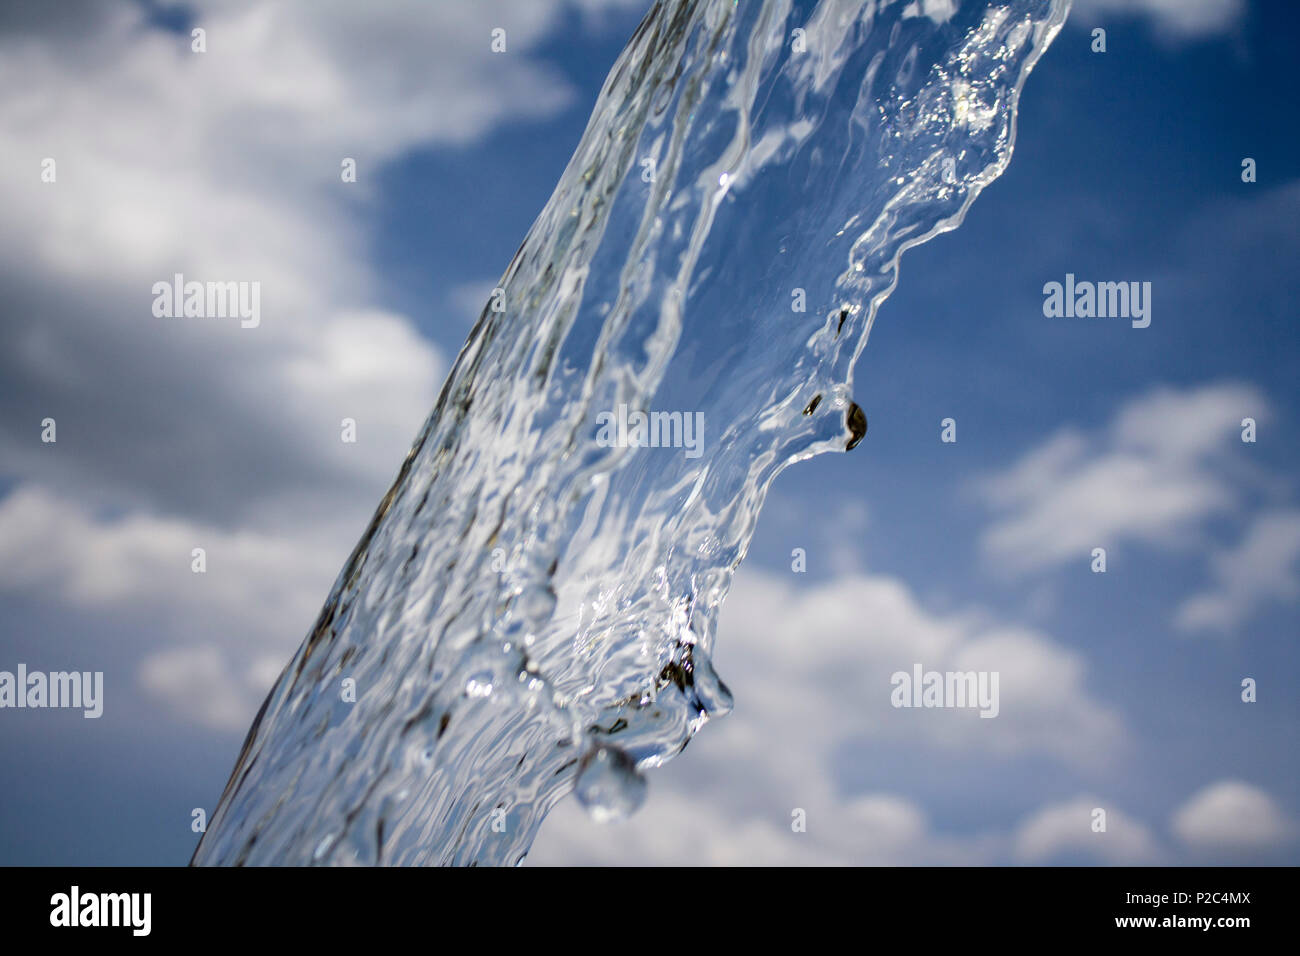 Photo of stream of water over sky background. Close-up view Stock Photo